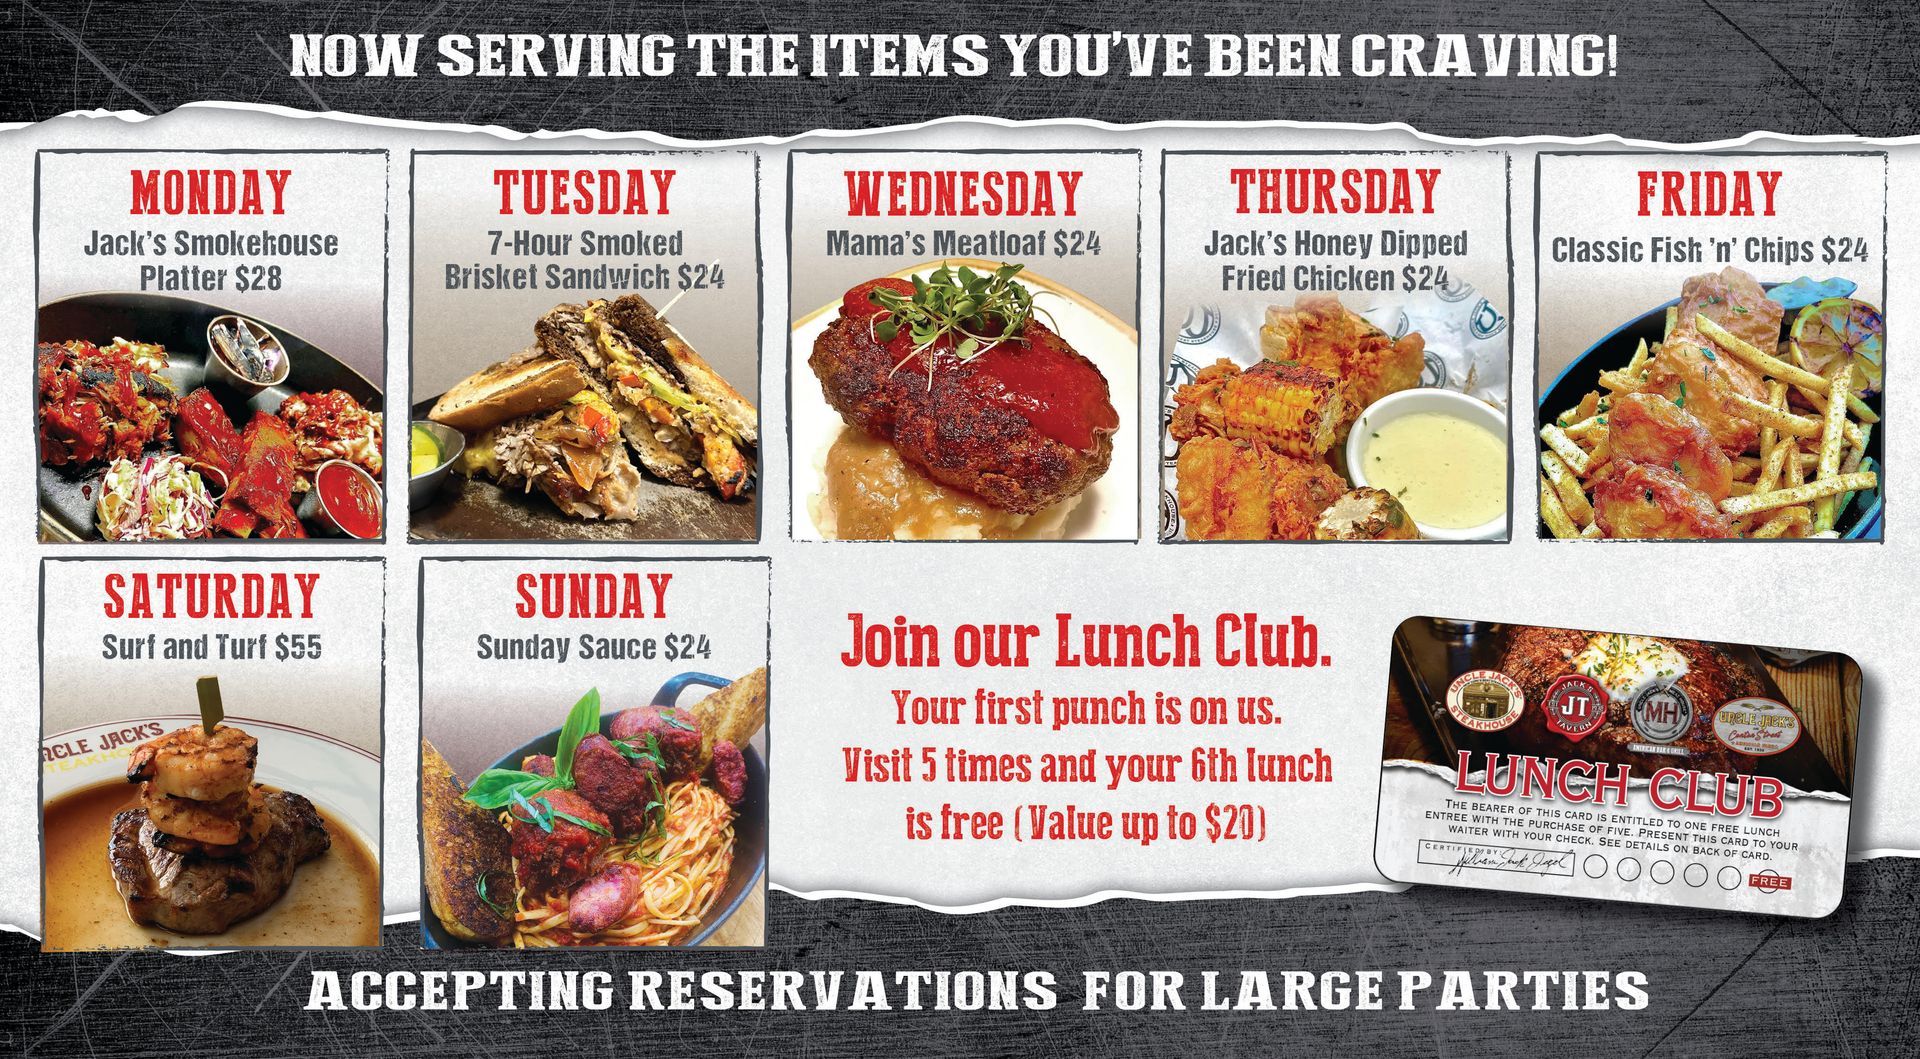 Specials Monday Jack's smokehouse patter $20 Tuesday 7 Hour Smoked Brisket Sandwich $22 Wednesdays Mama's Meatloaf $20 Thursday Jack's Honey Dipped Fried Chicken $24 Friday Classic Fish 'n' Chips Saturday Surf and Turf $55 Sunday Sunday Sauce $24 and don't forget to join our lunch club